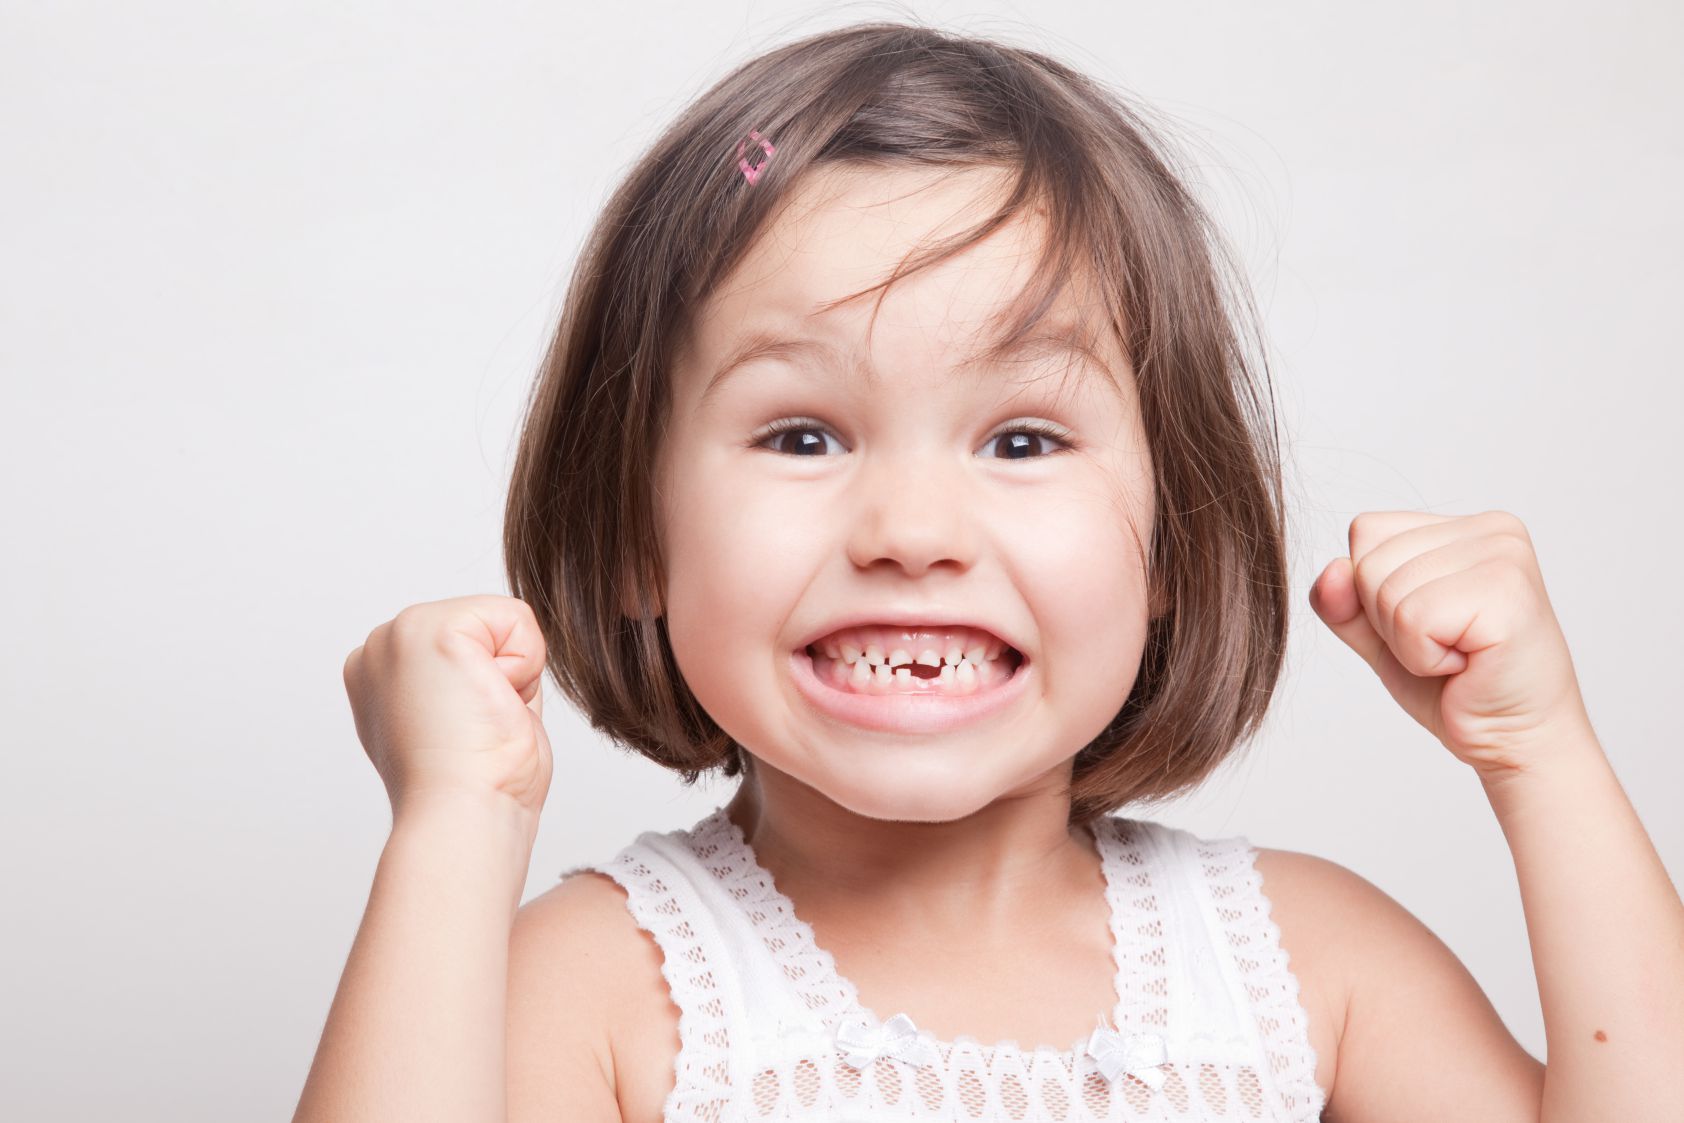 pediatric dental practice environment is great for kids with service sprovided by Treasured Smiles in Maricopa, AZ